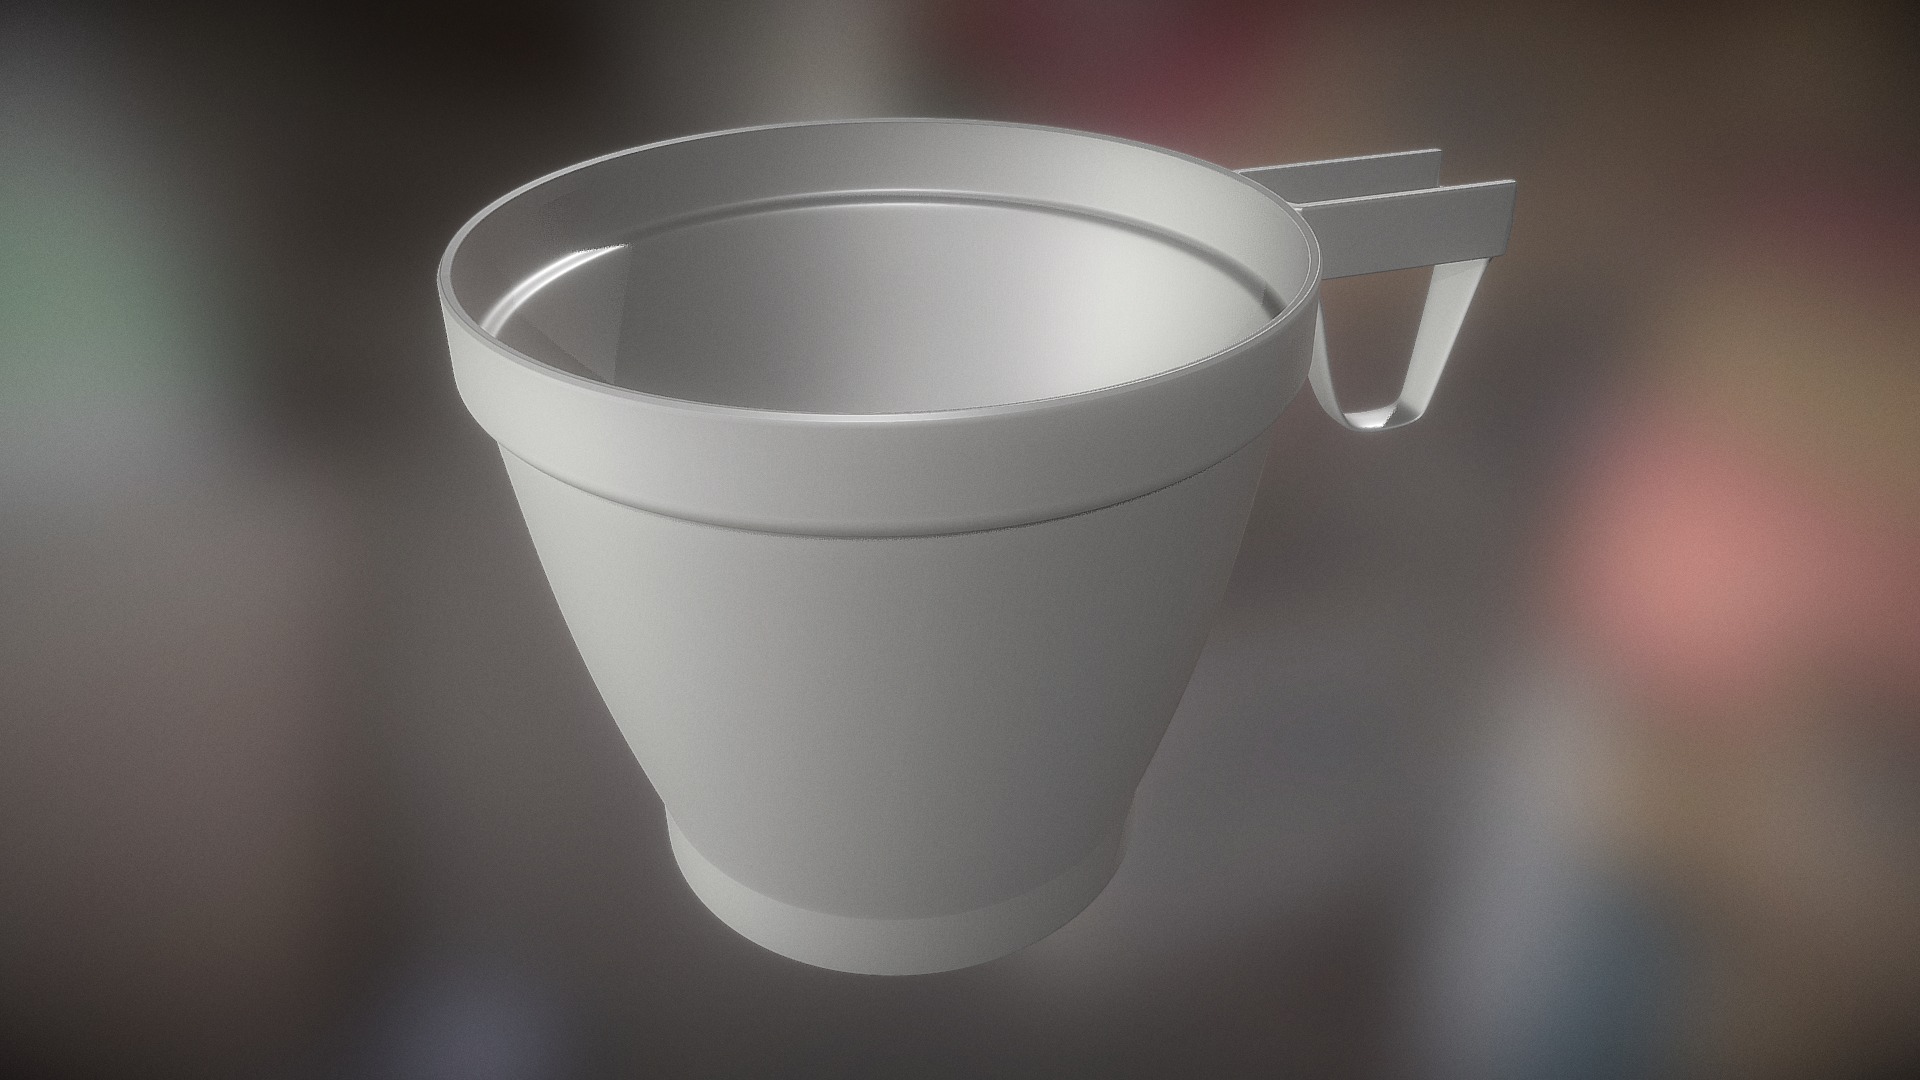 3D model Plastic Cup 2 High-Poly Version - This is a 3D model of the Plastic Cup 2 High-Poly Version. The 3D model is about a white cup with a handle.